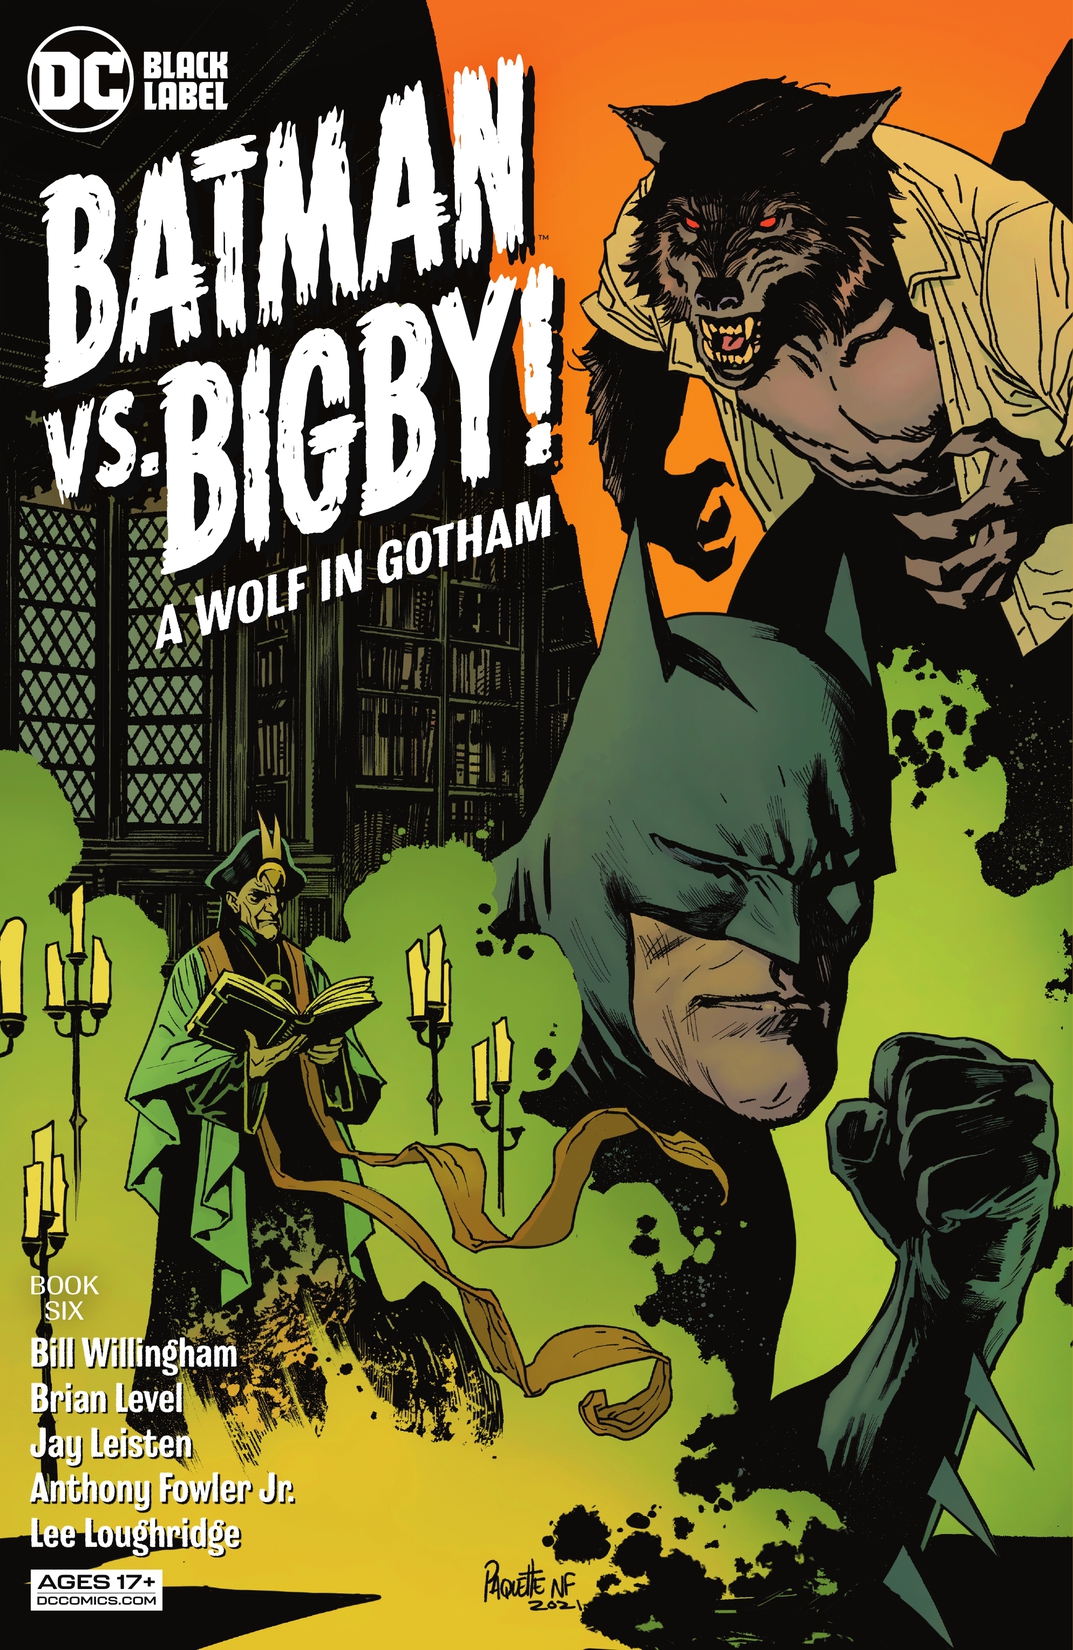 Batman Vs. Bigby! A Wolf In Gotham #6 preview images